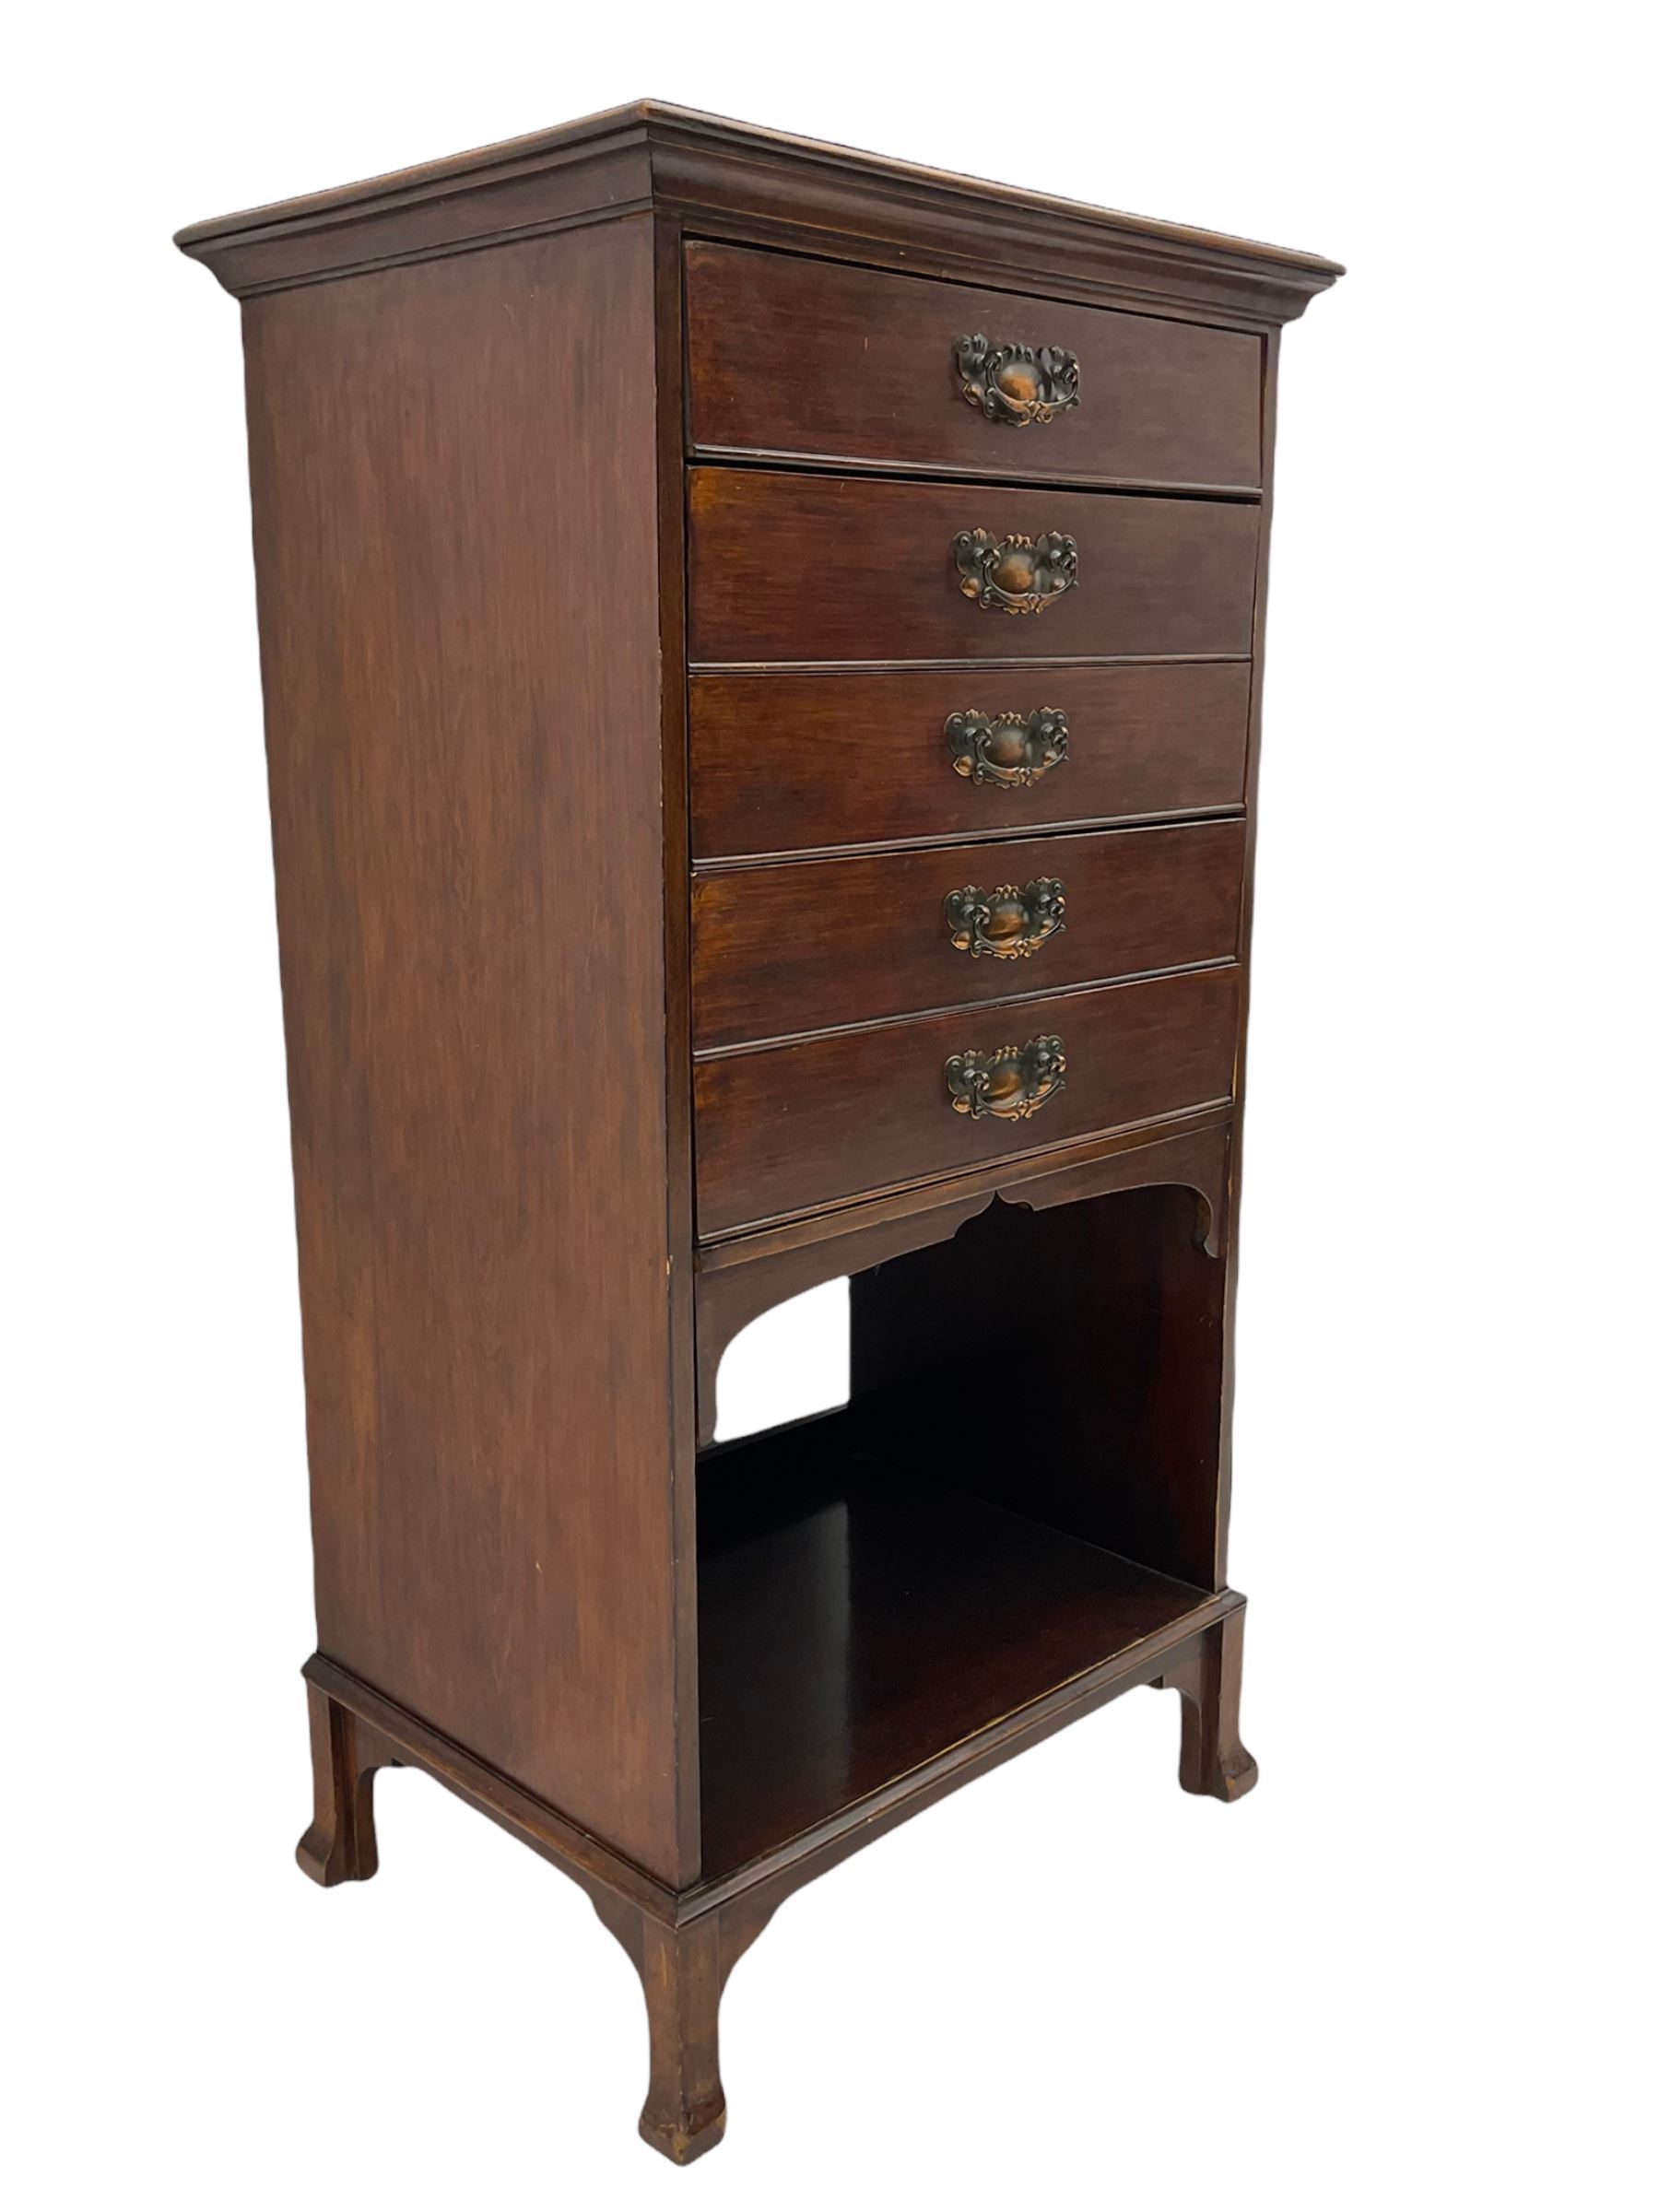 Edwardian stained beech music cabinet by Matthew Fowler Durham - Image 4 of 7